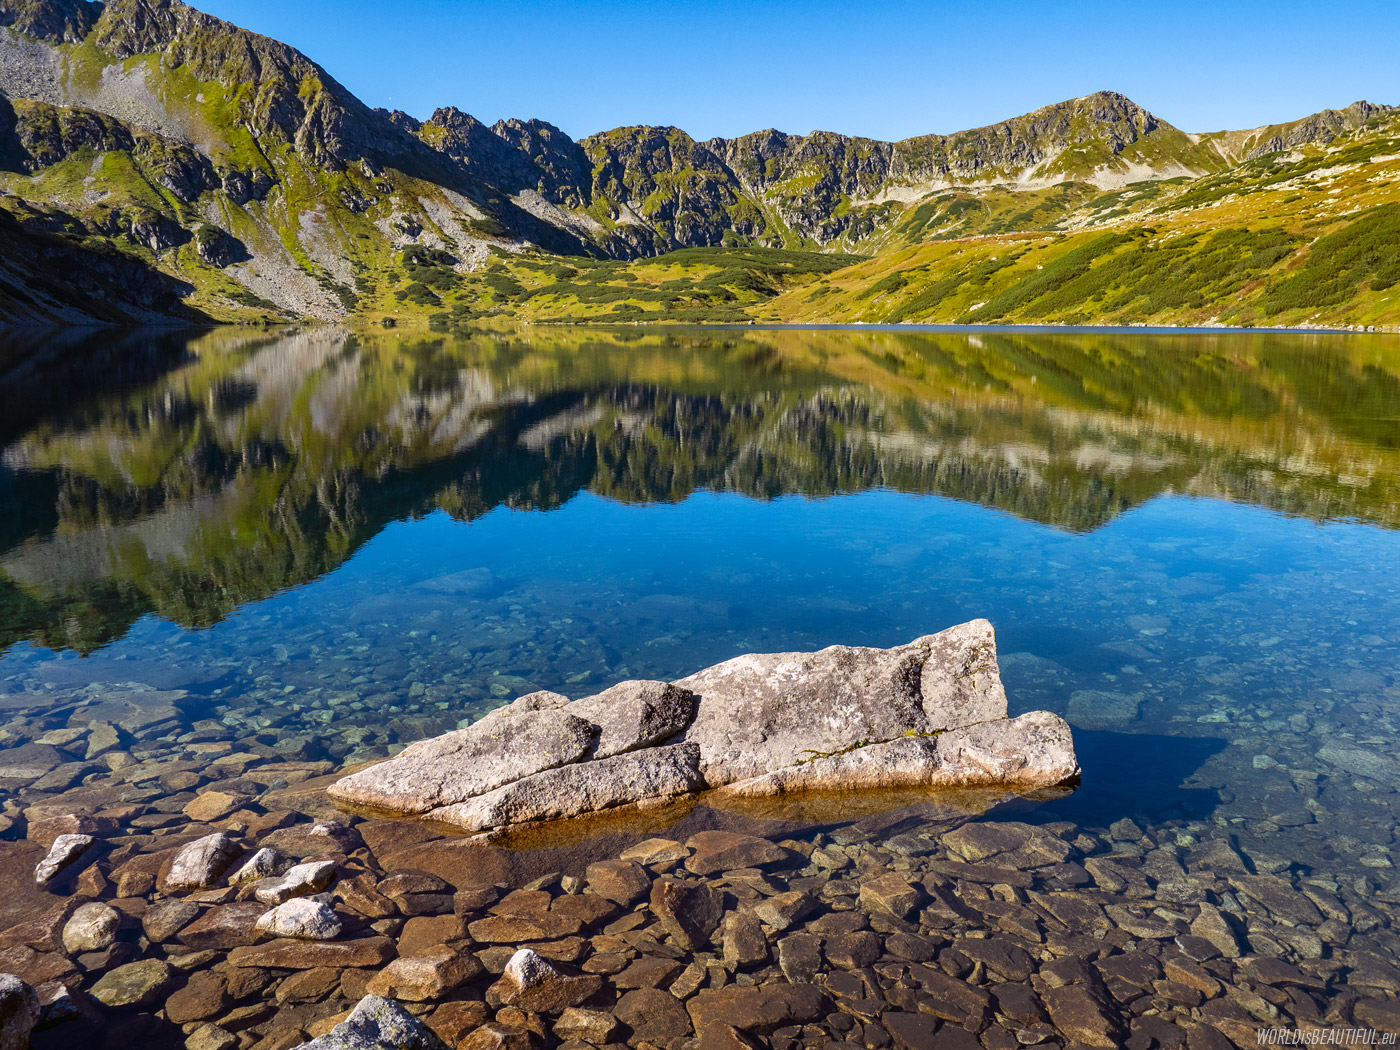 The deepest lake in the Tatras